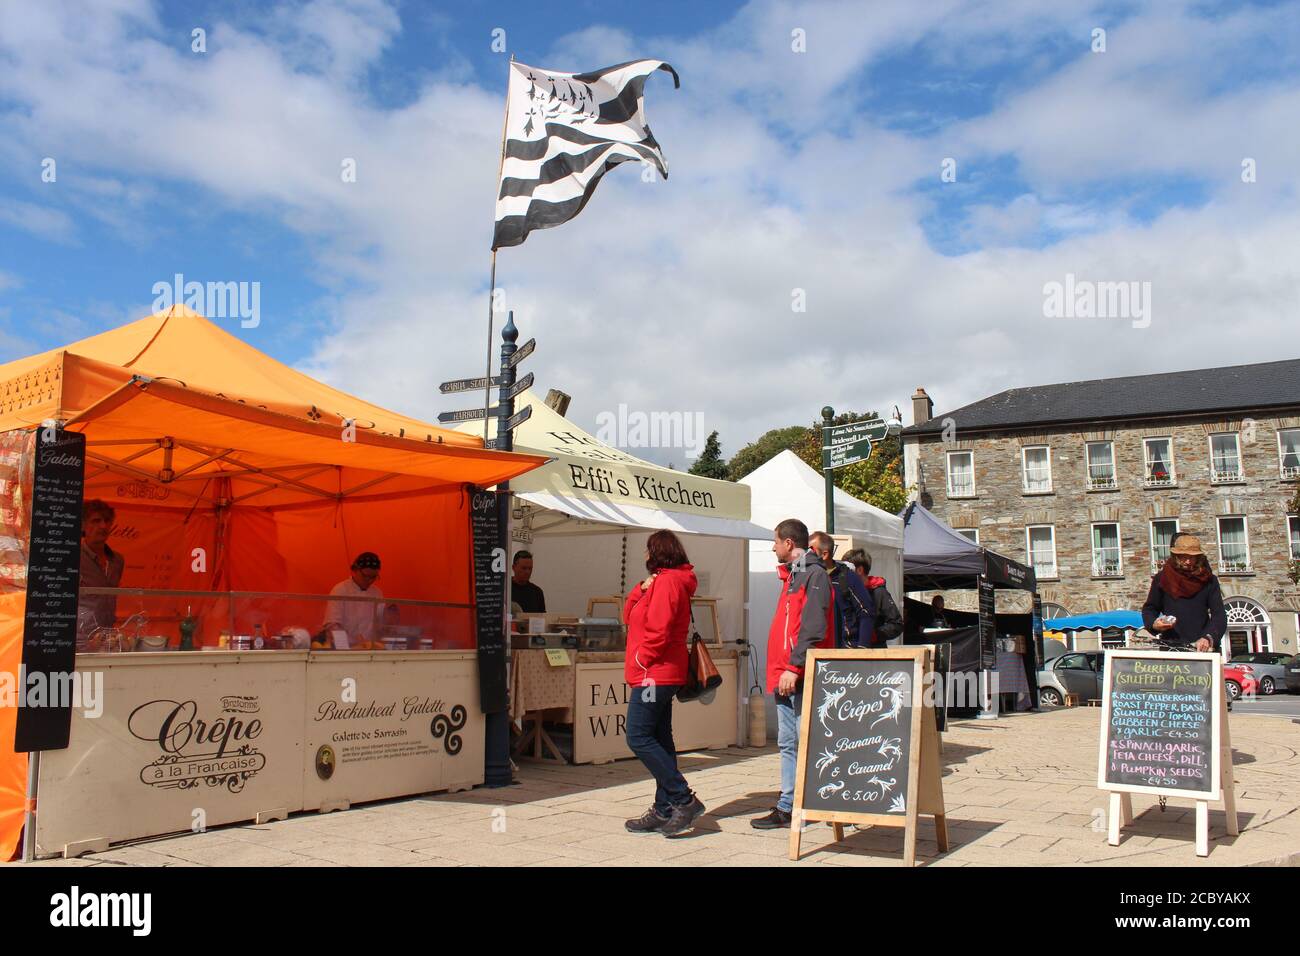 People queuing at food stall during Friday Market in Wolfe Tone Square, Bantry, Co Cork, Ireland. Stock Photo